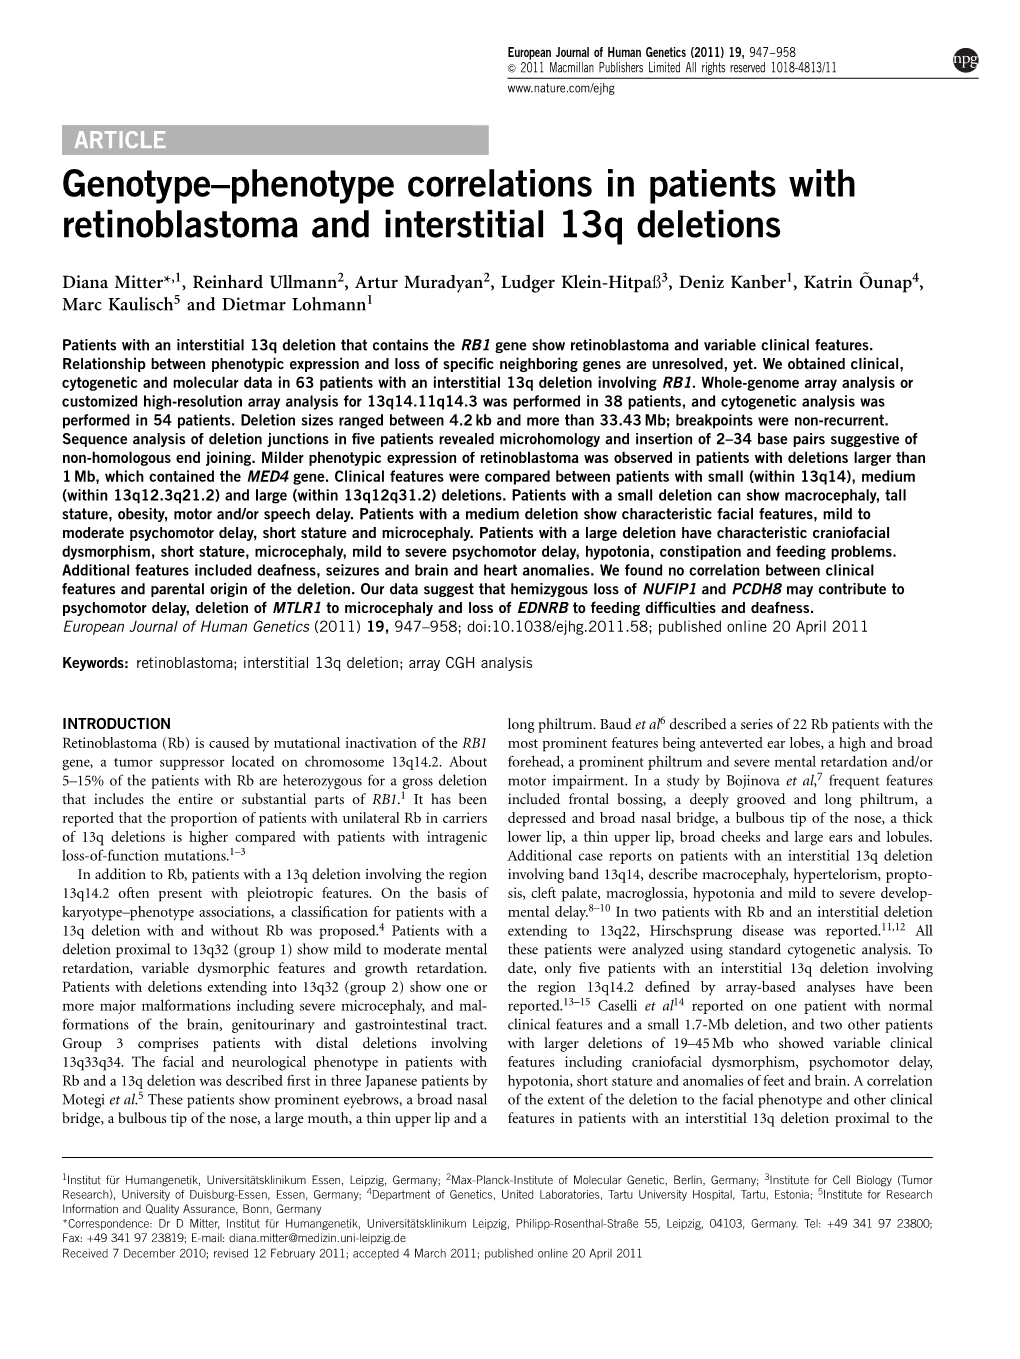 Phenotype Correlations in Patients with Retinoblastoma and Interstitial 13Q Deletions